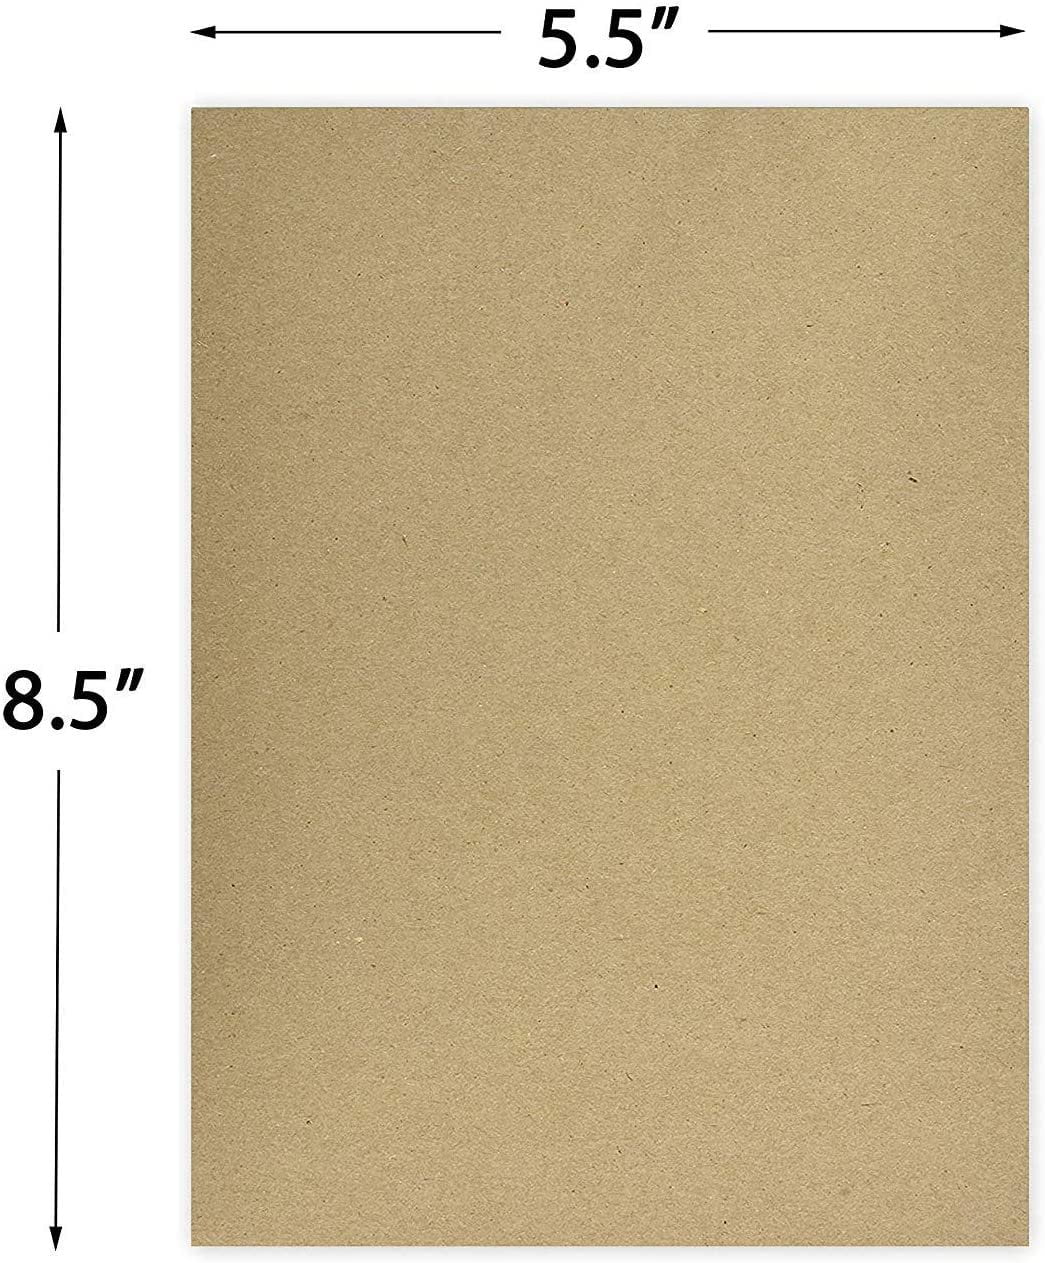  Mega Format Cardboard Sheets, Chipboard Sheets, Chip Board,  Paperboard .030 Thick - Cardboard Paper, Cardboard Inserts for Mailers,  Cardboard for Crafts, Large Cardboard Sheets (8.5 x 11, 5-Pack) : Office  Products